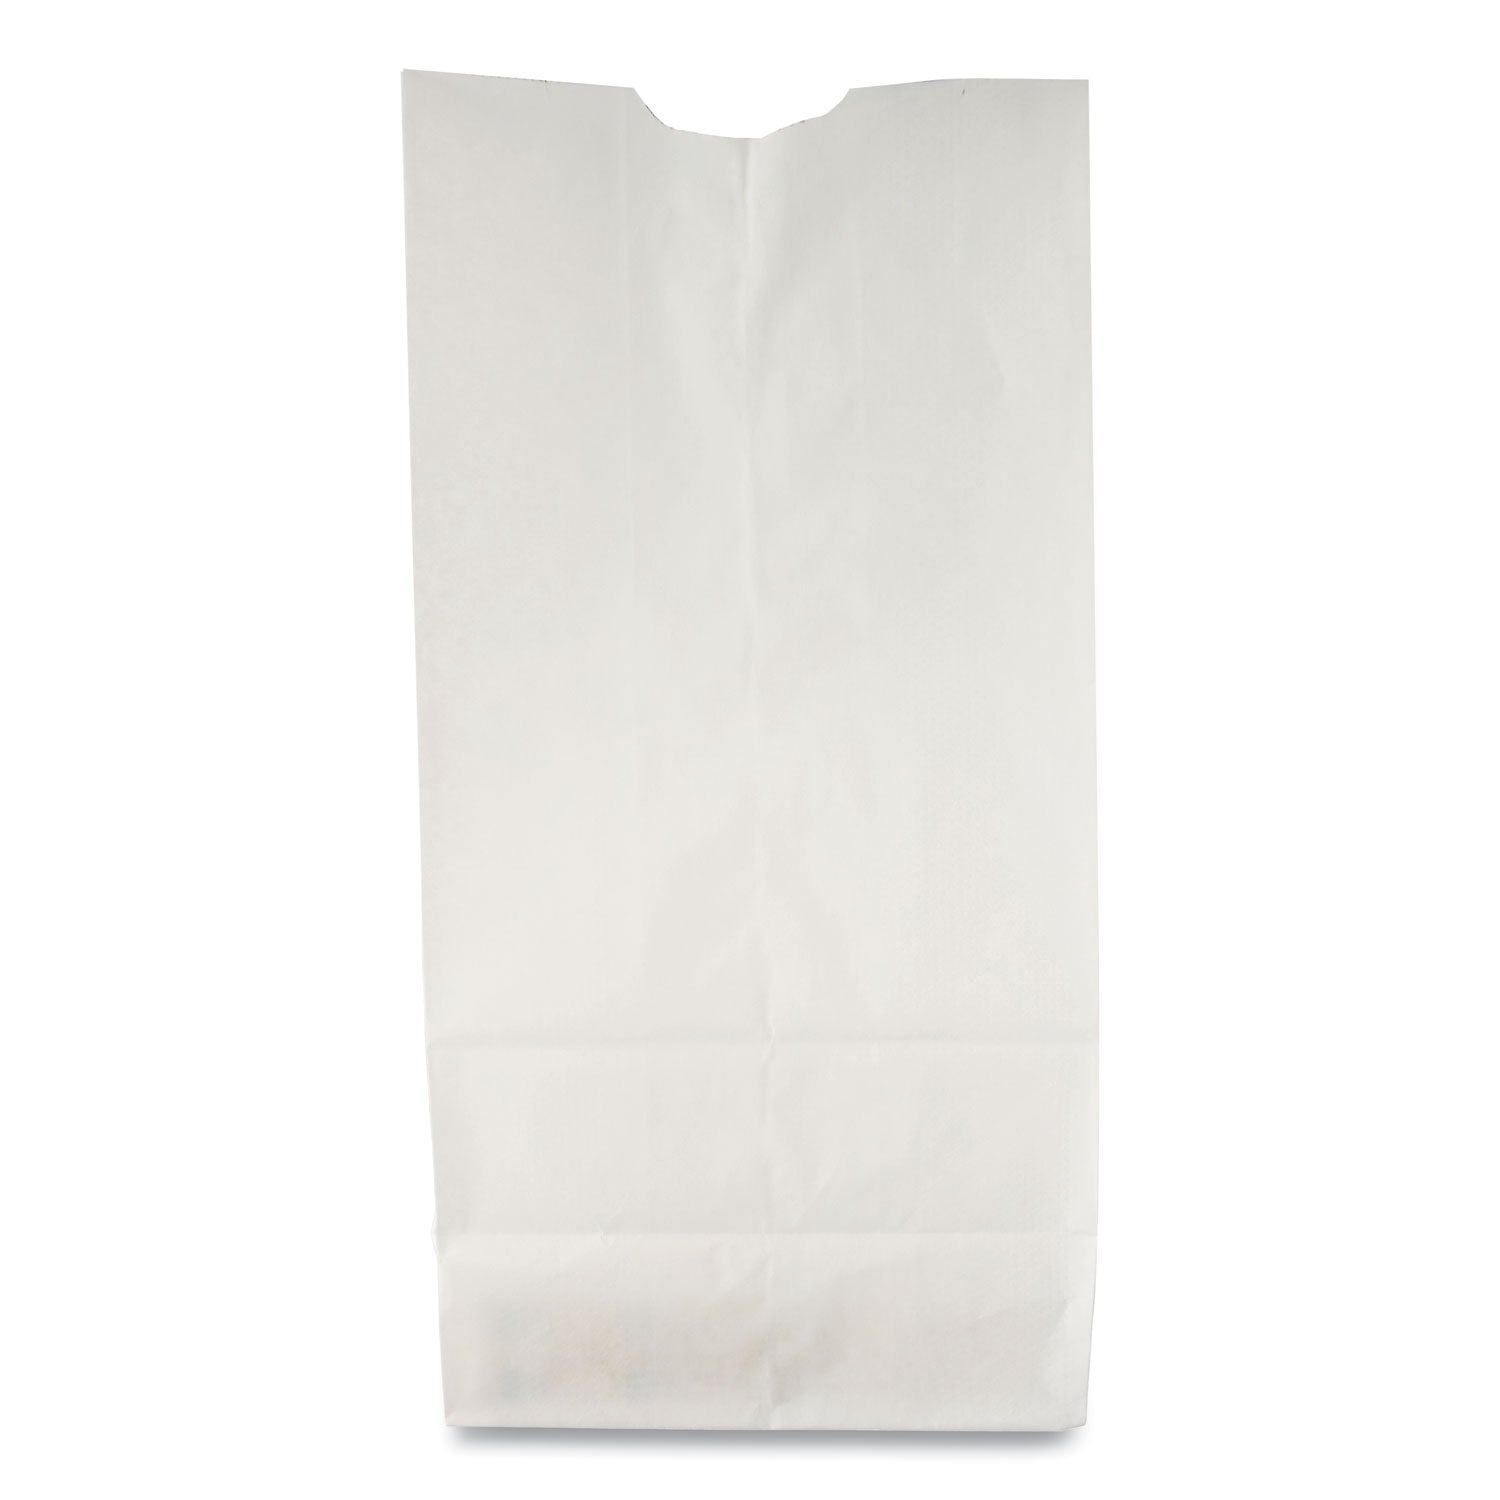 grocery-paper-bags-35-lb-capacity-#10-631-x-419-x-1338-white-500-bags_baggw10500 - 1